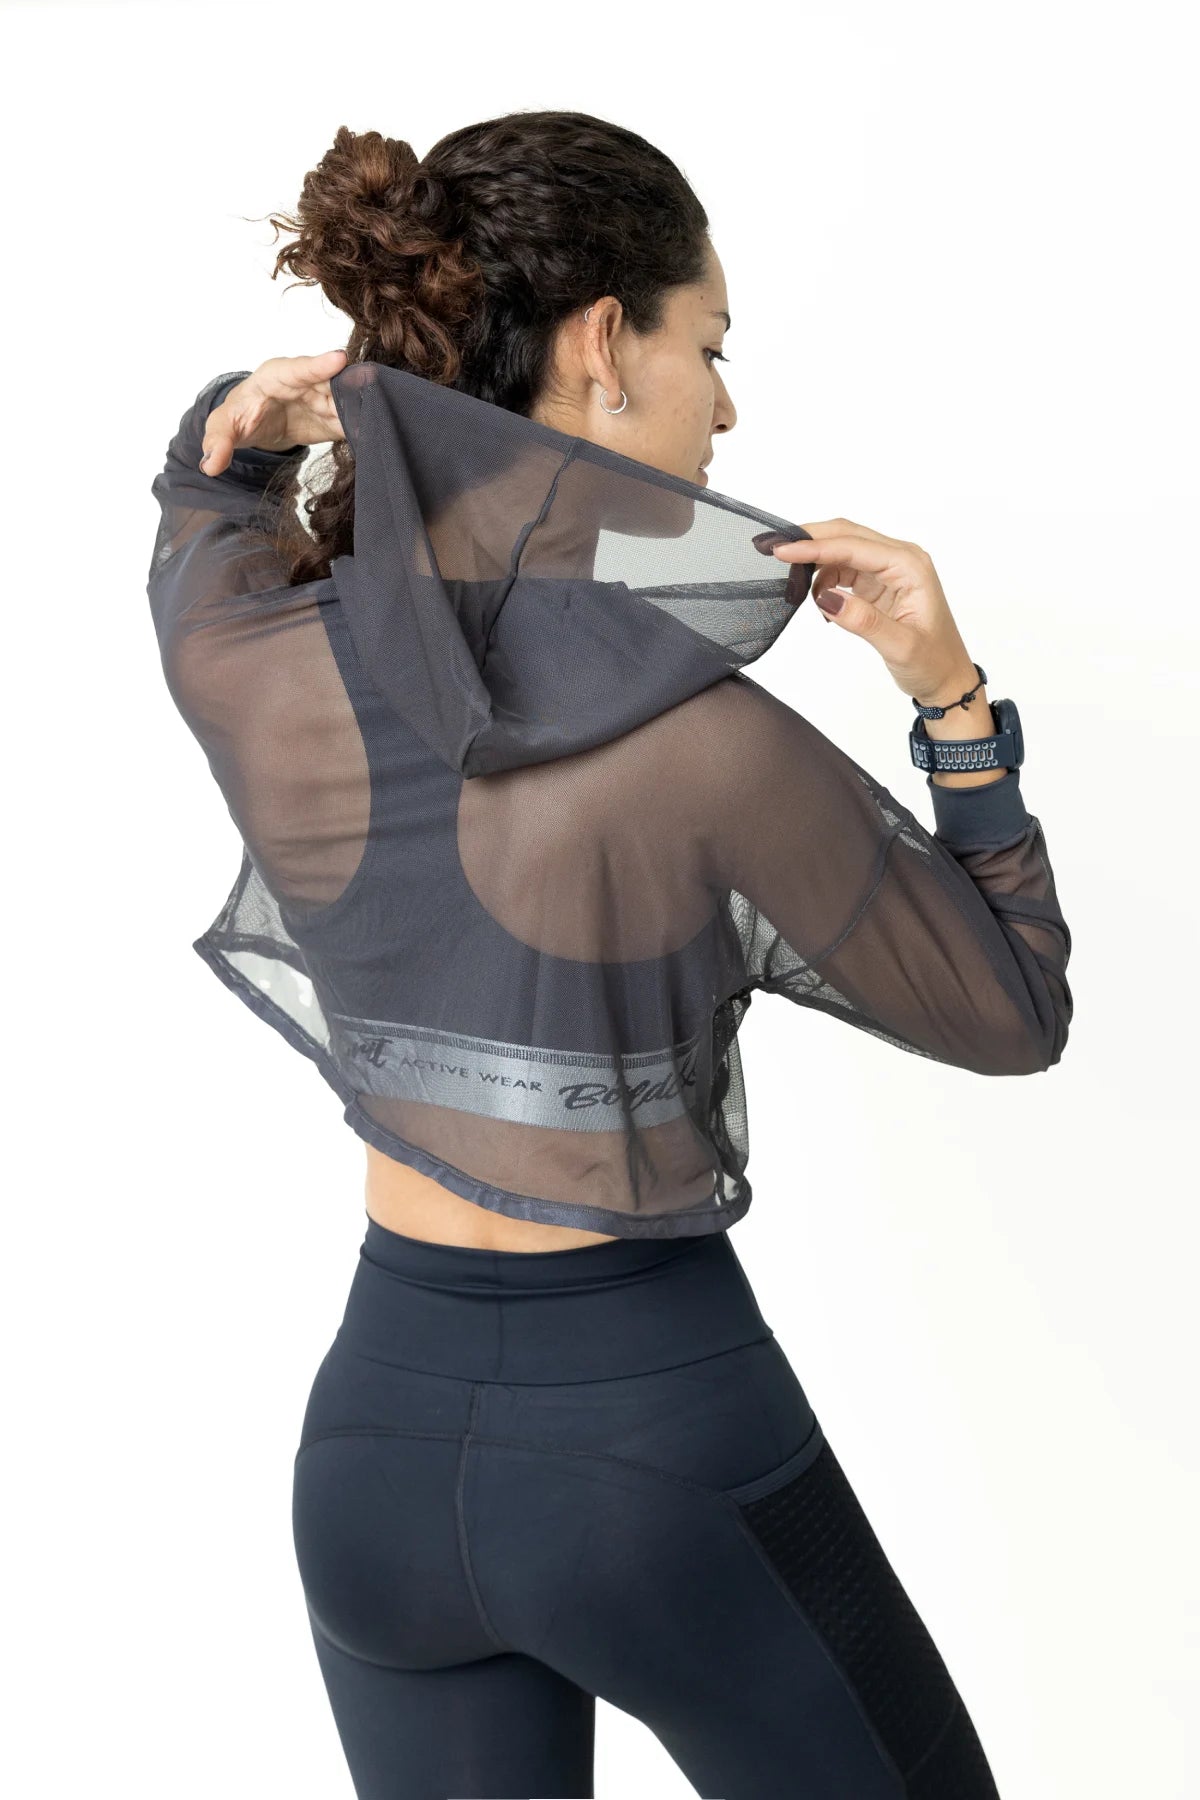 Women's Energy Silver Hoodie  Translucent Mesh Material - Bold&Grit